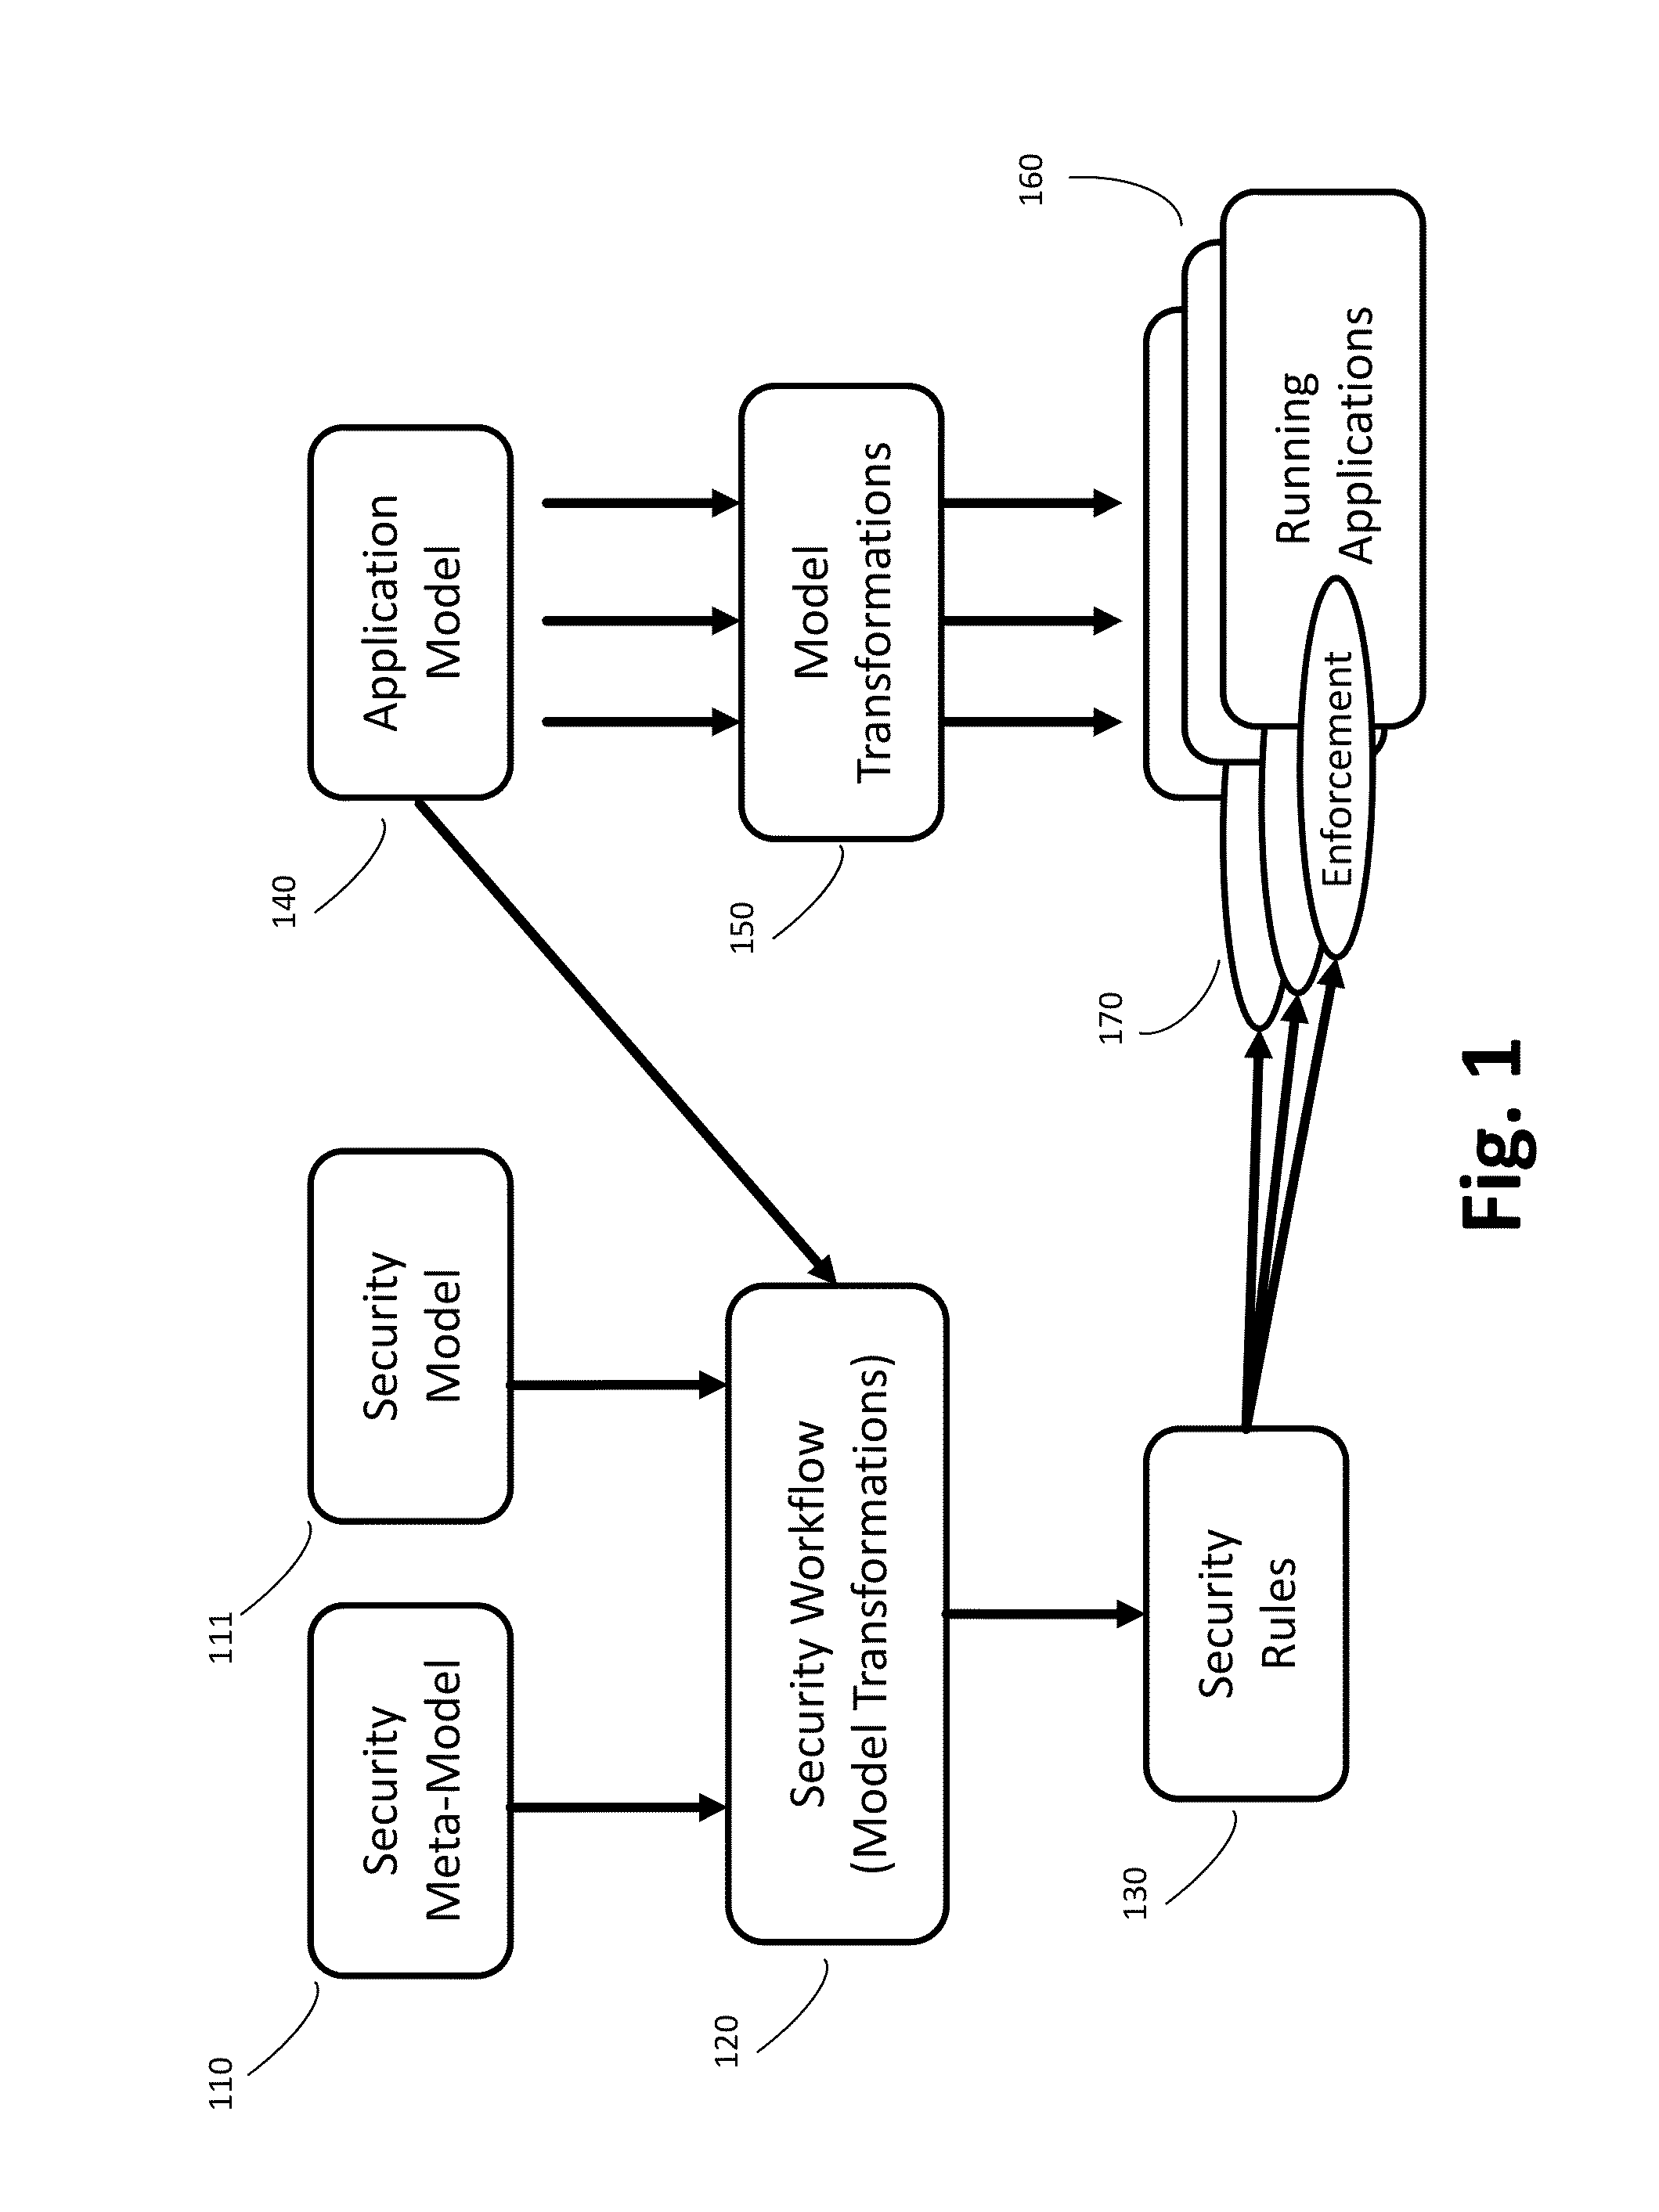 Automated and adaptive model-driven security system and method for operating the same